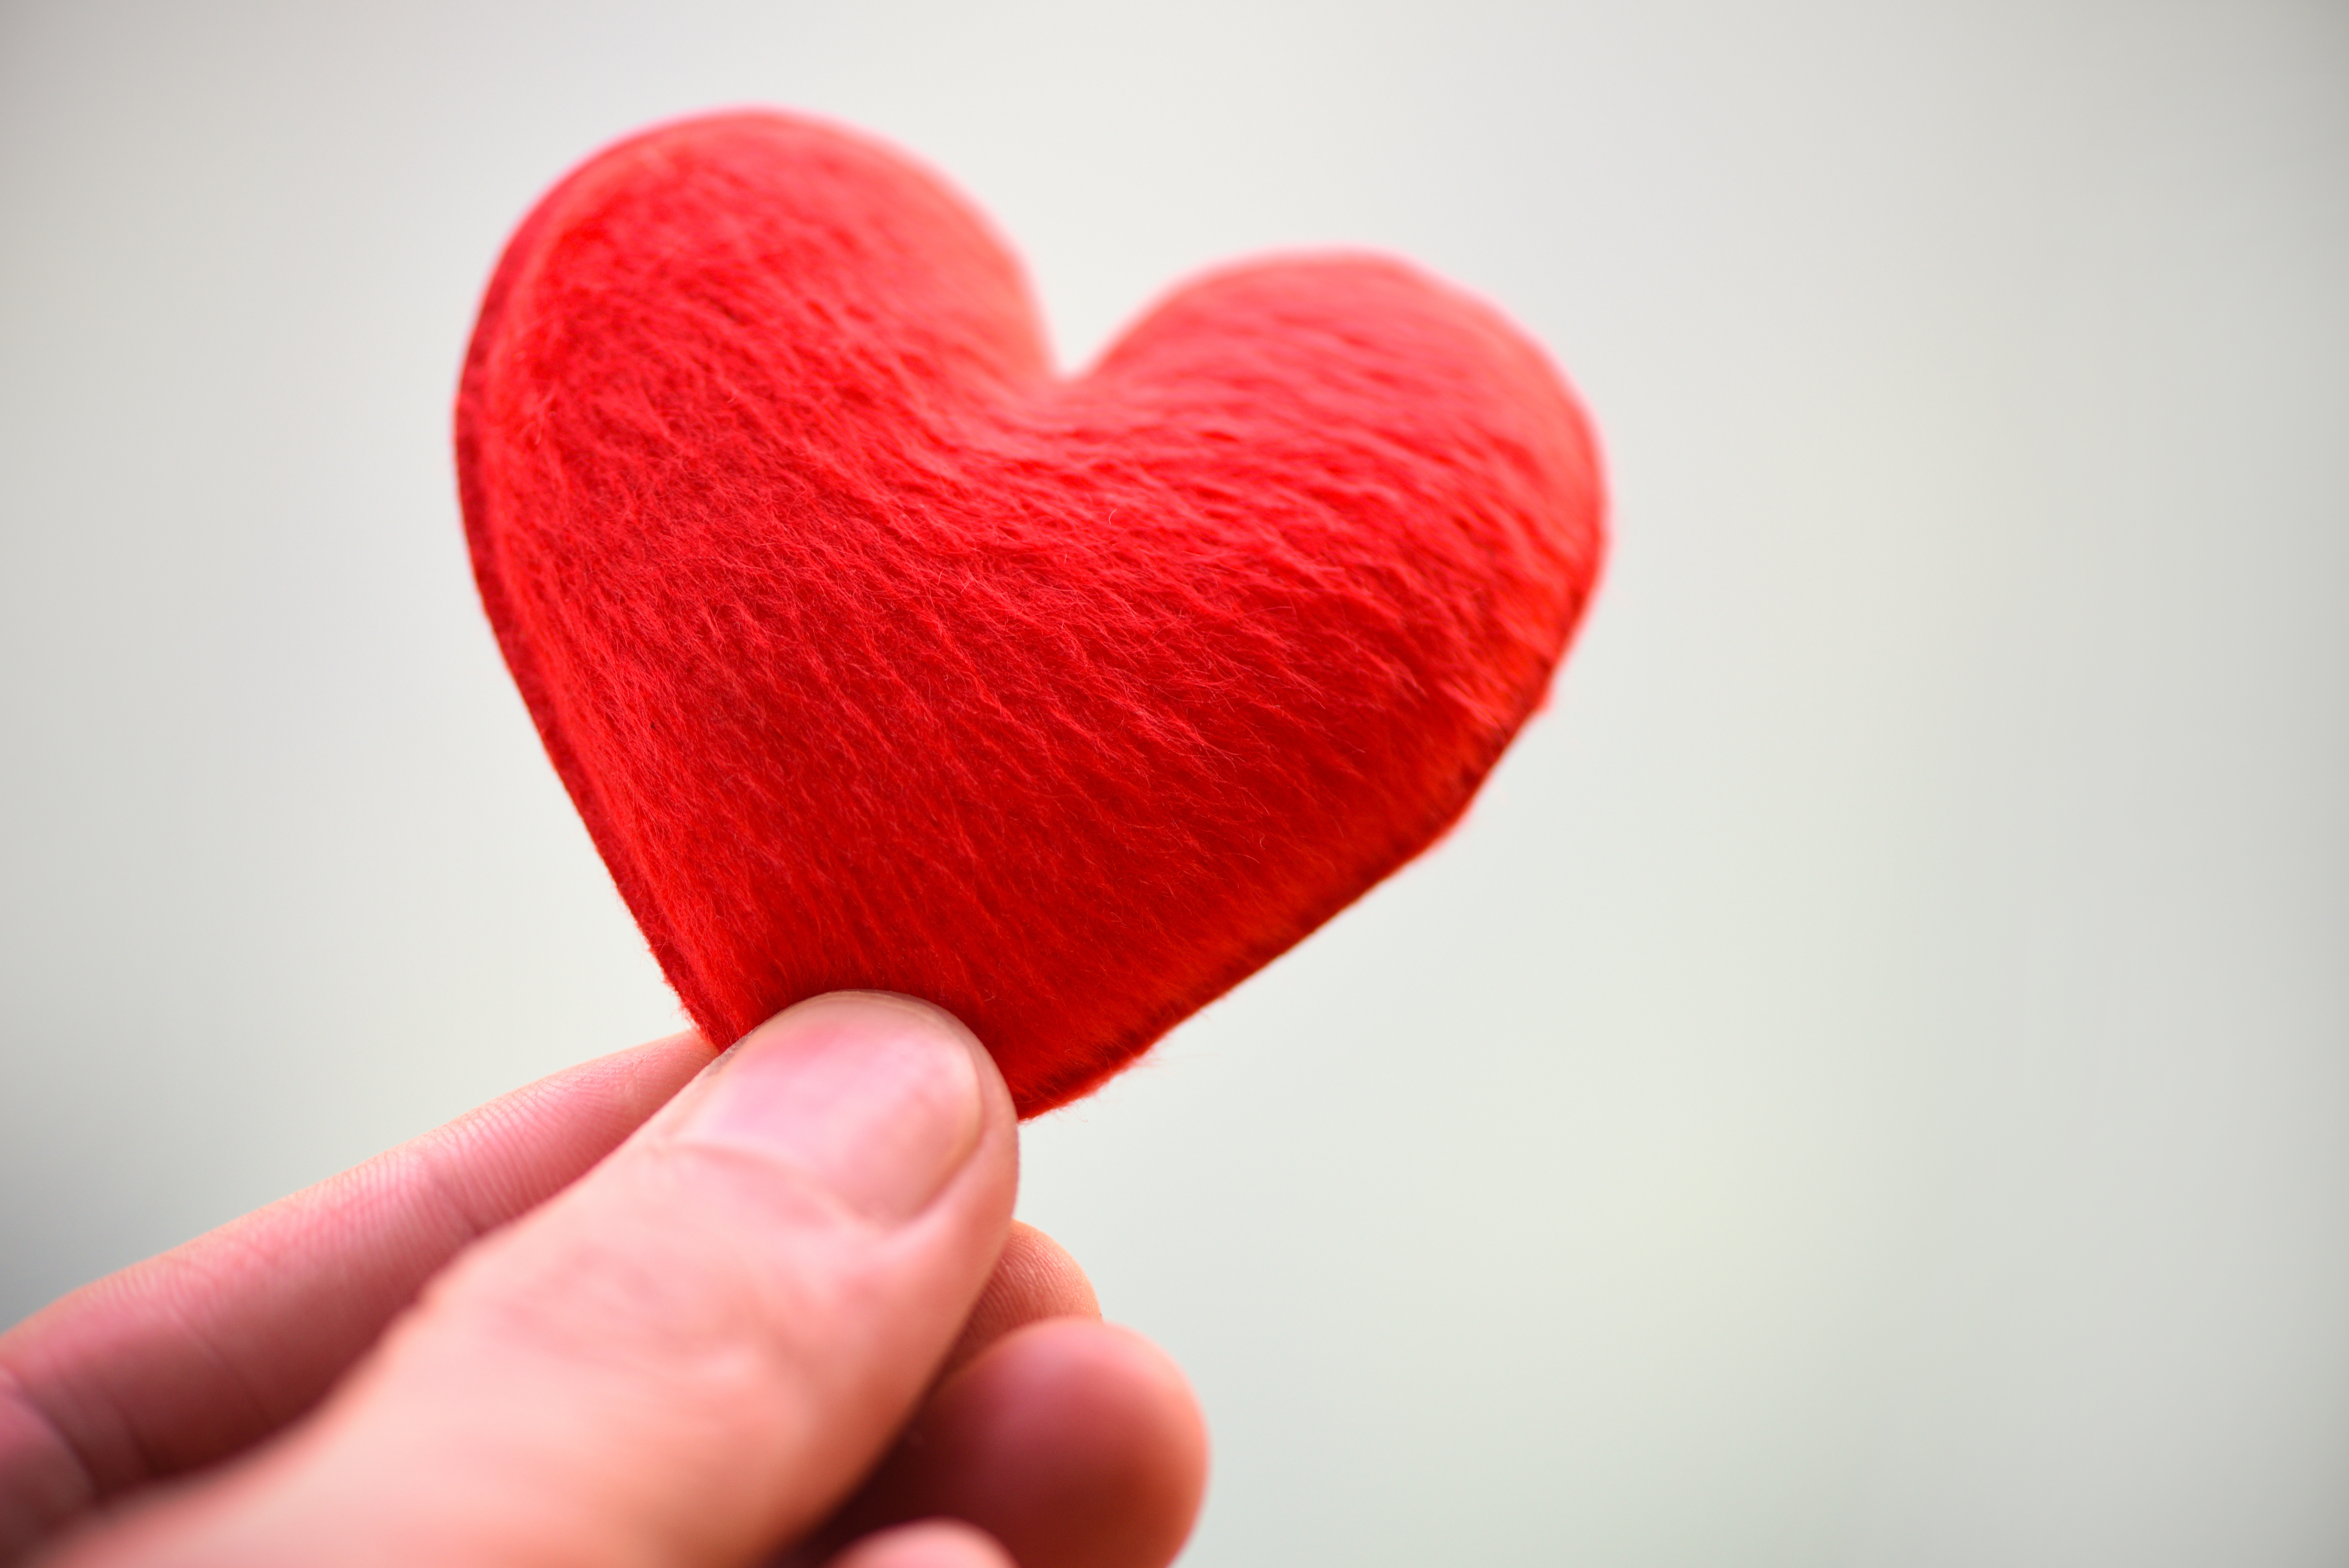 red heart held between a person's thumb and forefinger.